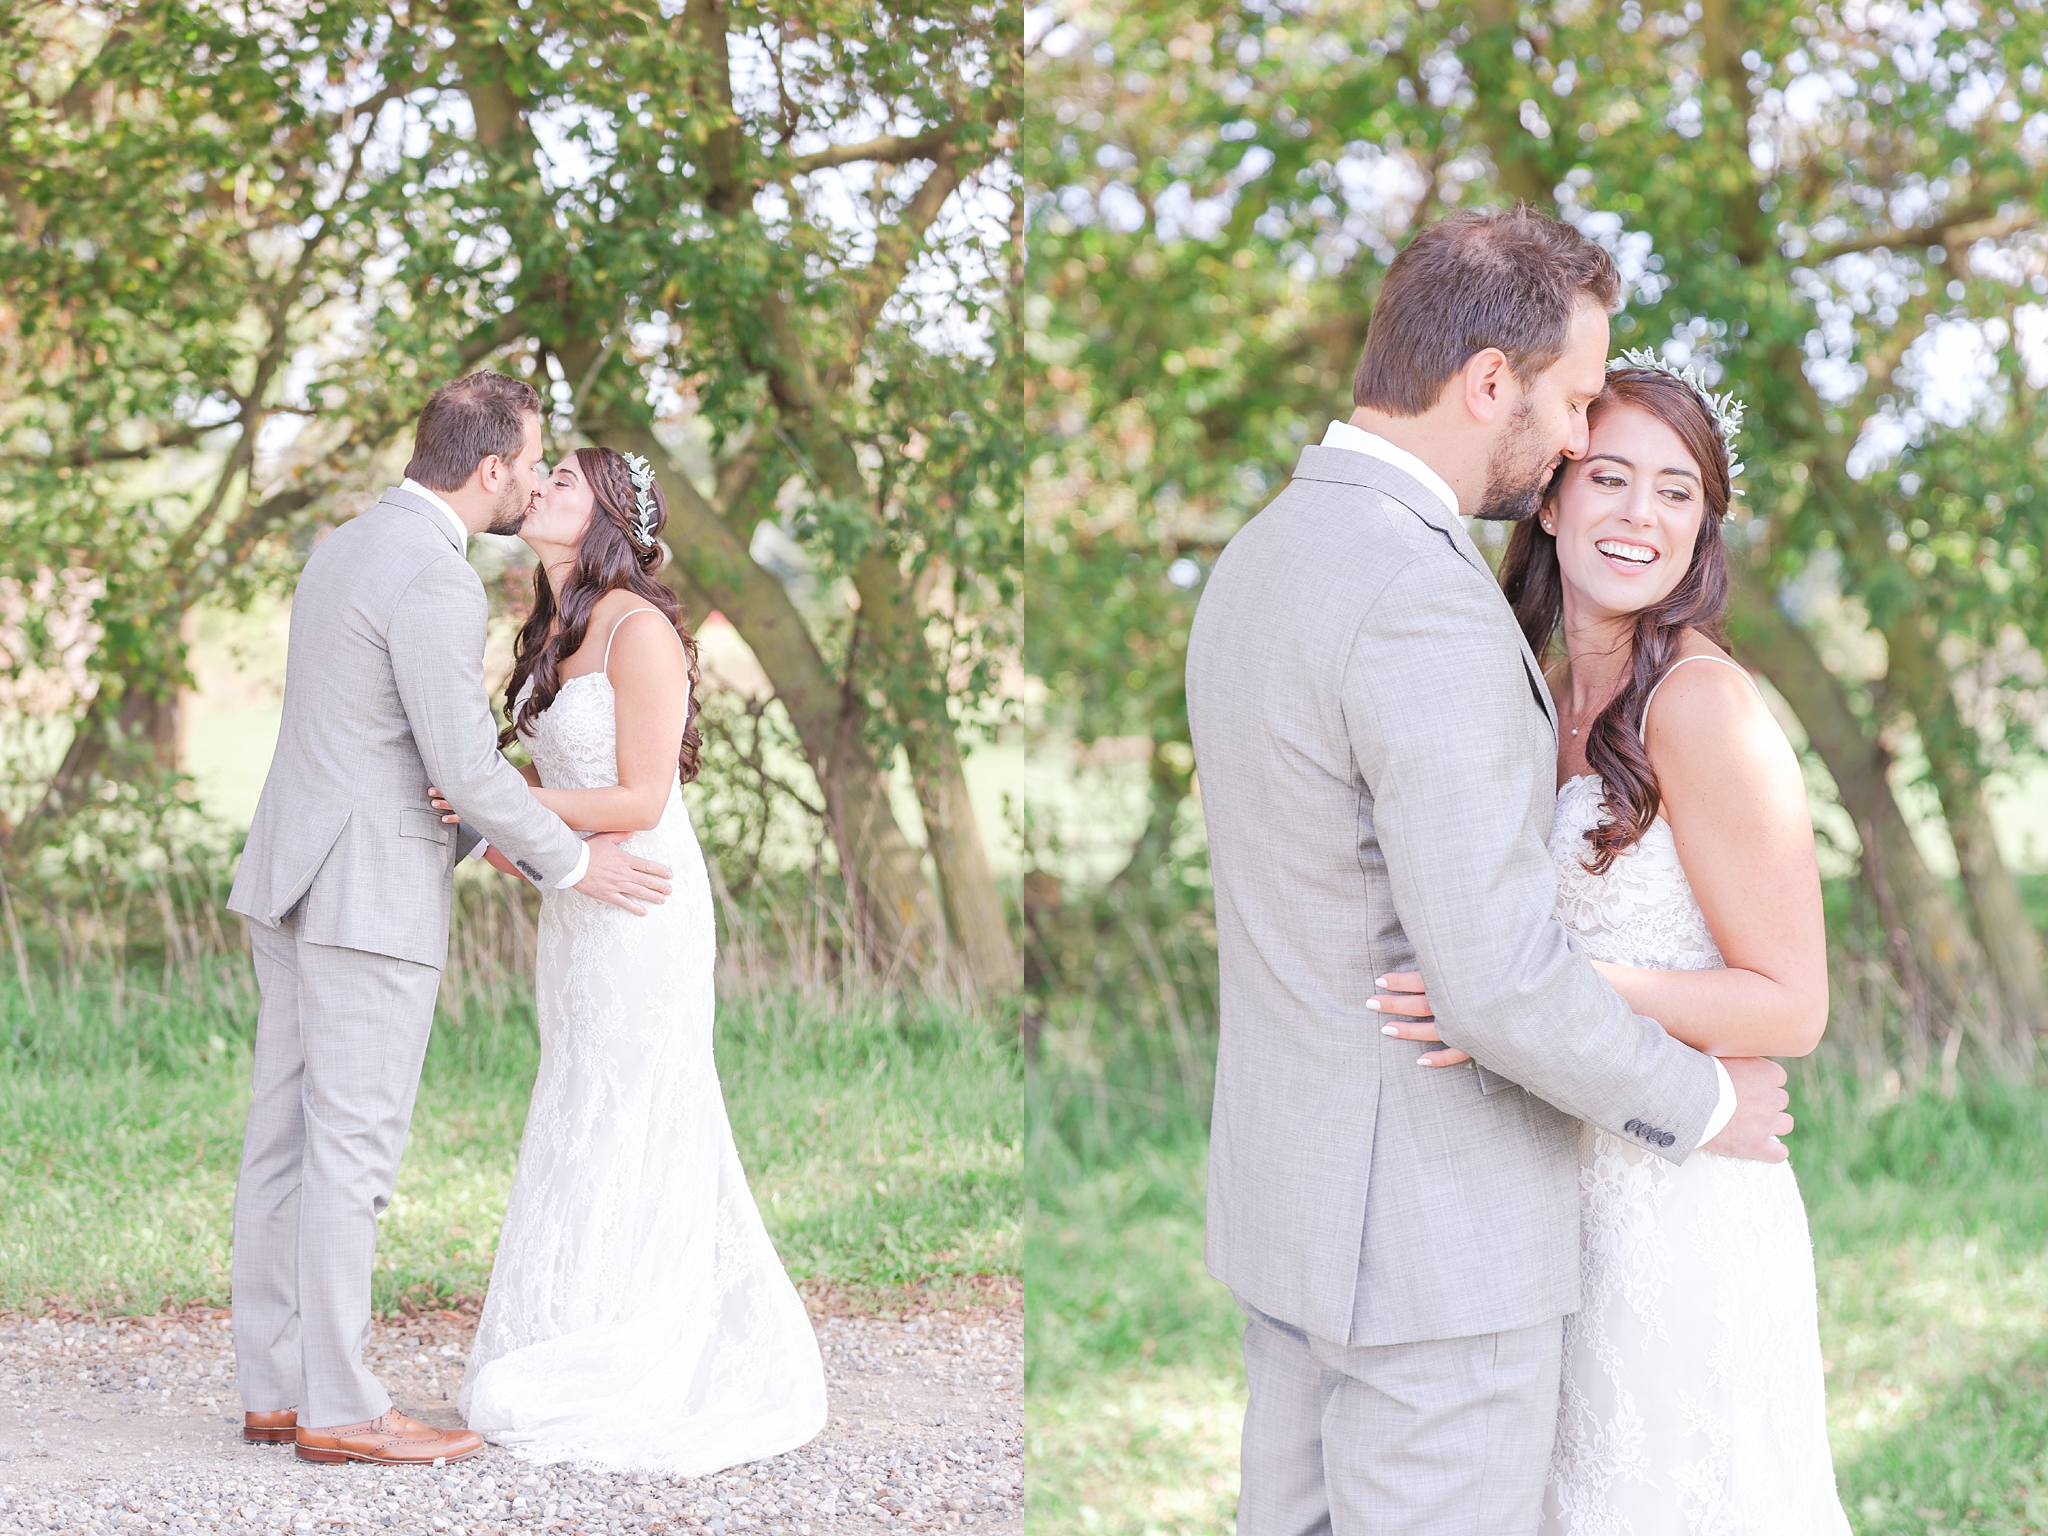 natural-rustic-wedding-photos-at-frutig-farms-the-valley-in-ann-arbor-michigan-by-courtney-carolyn-photography_0019.jpg